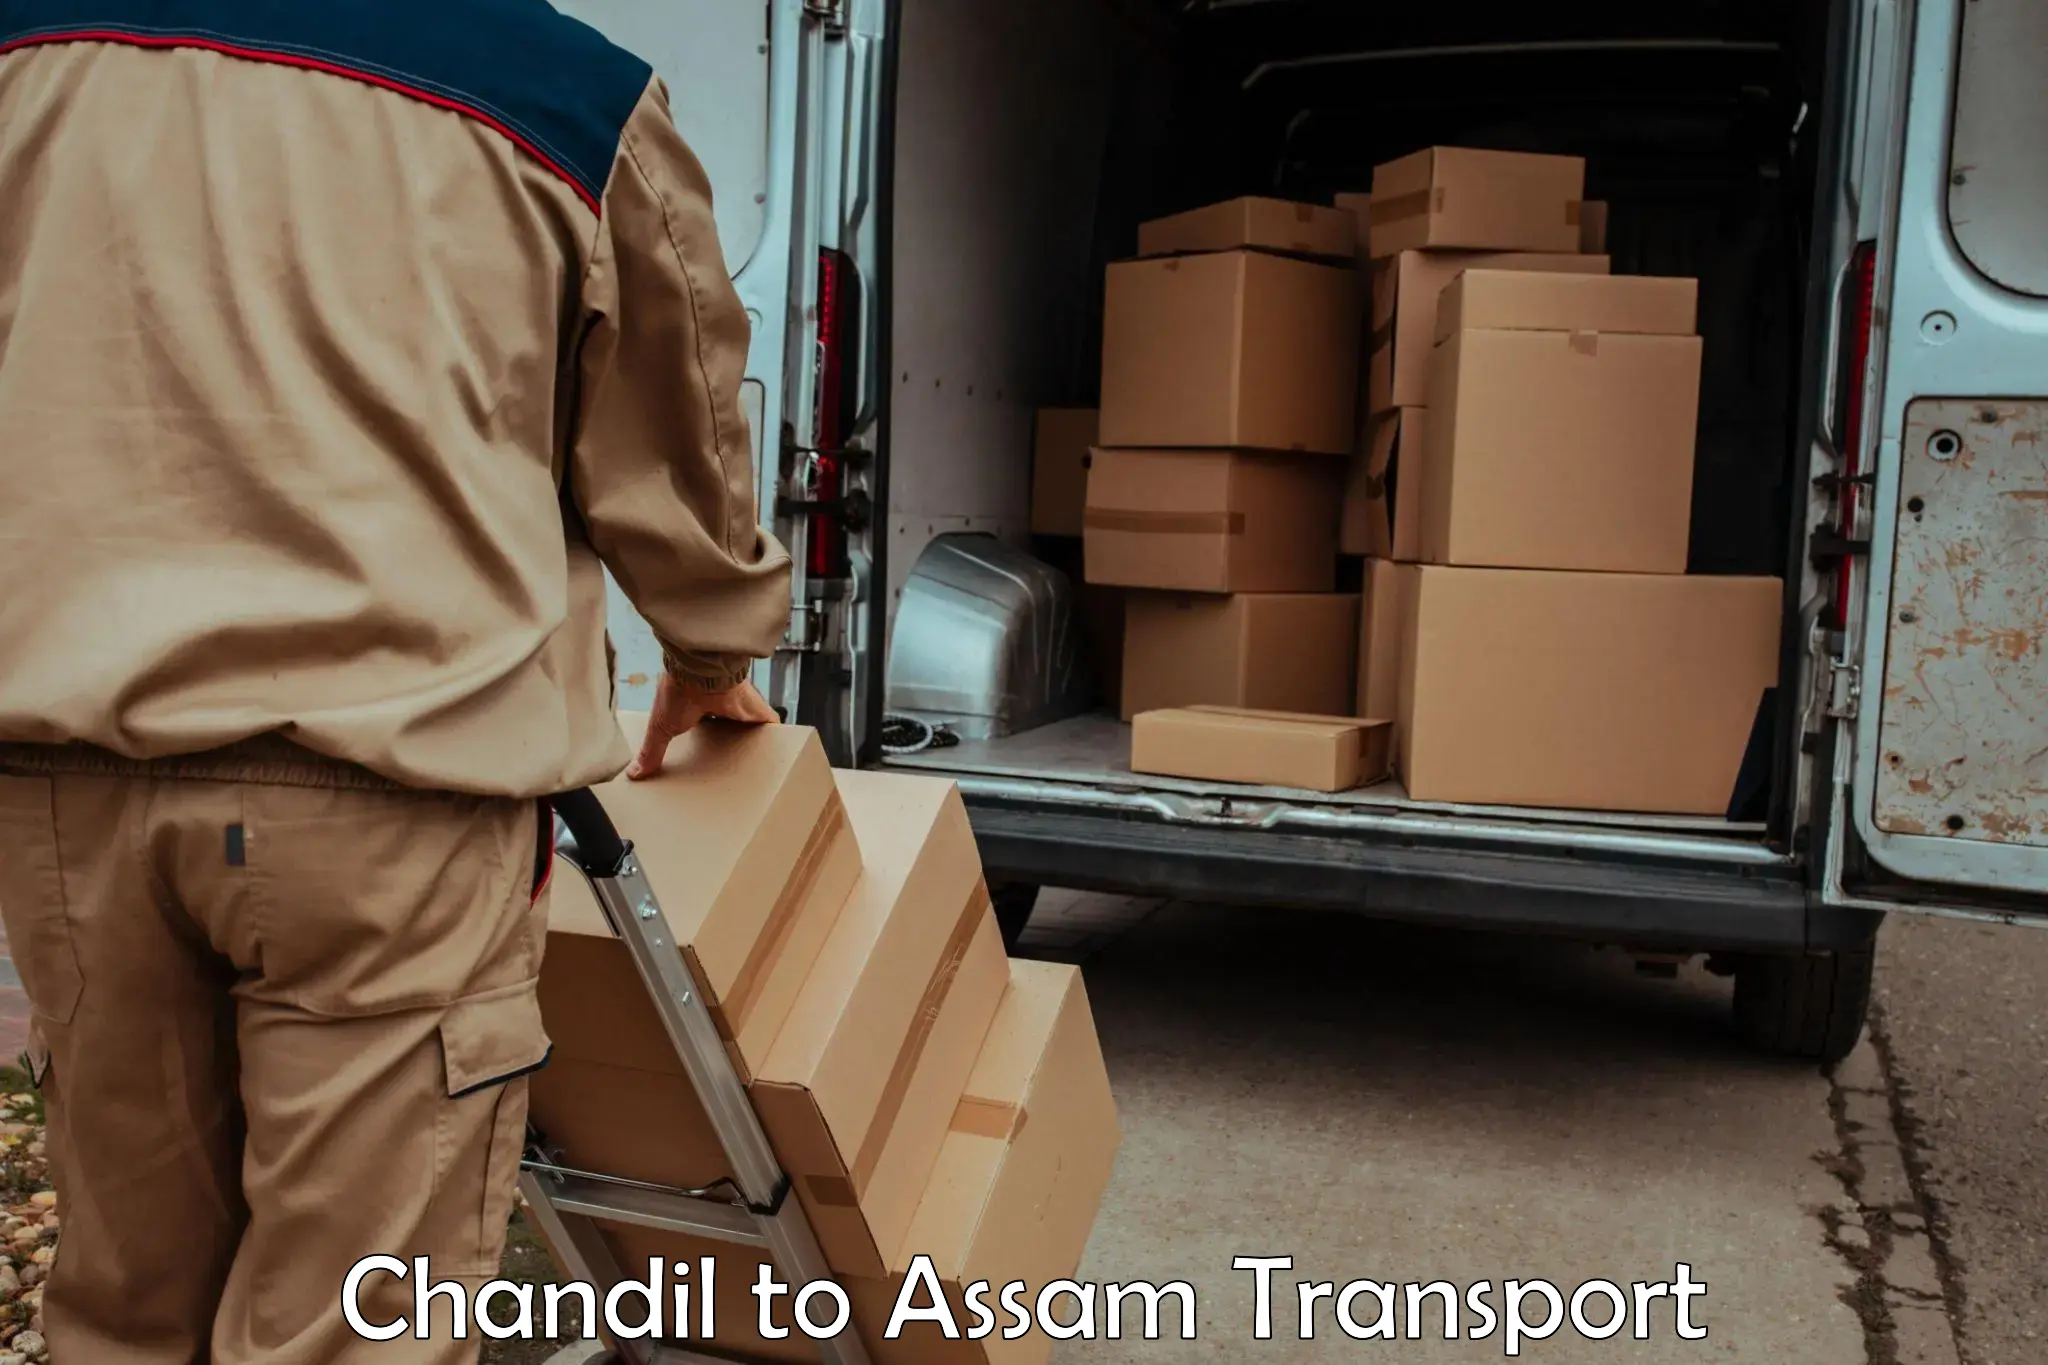 Container transport service Chandil to Assam